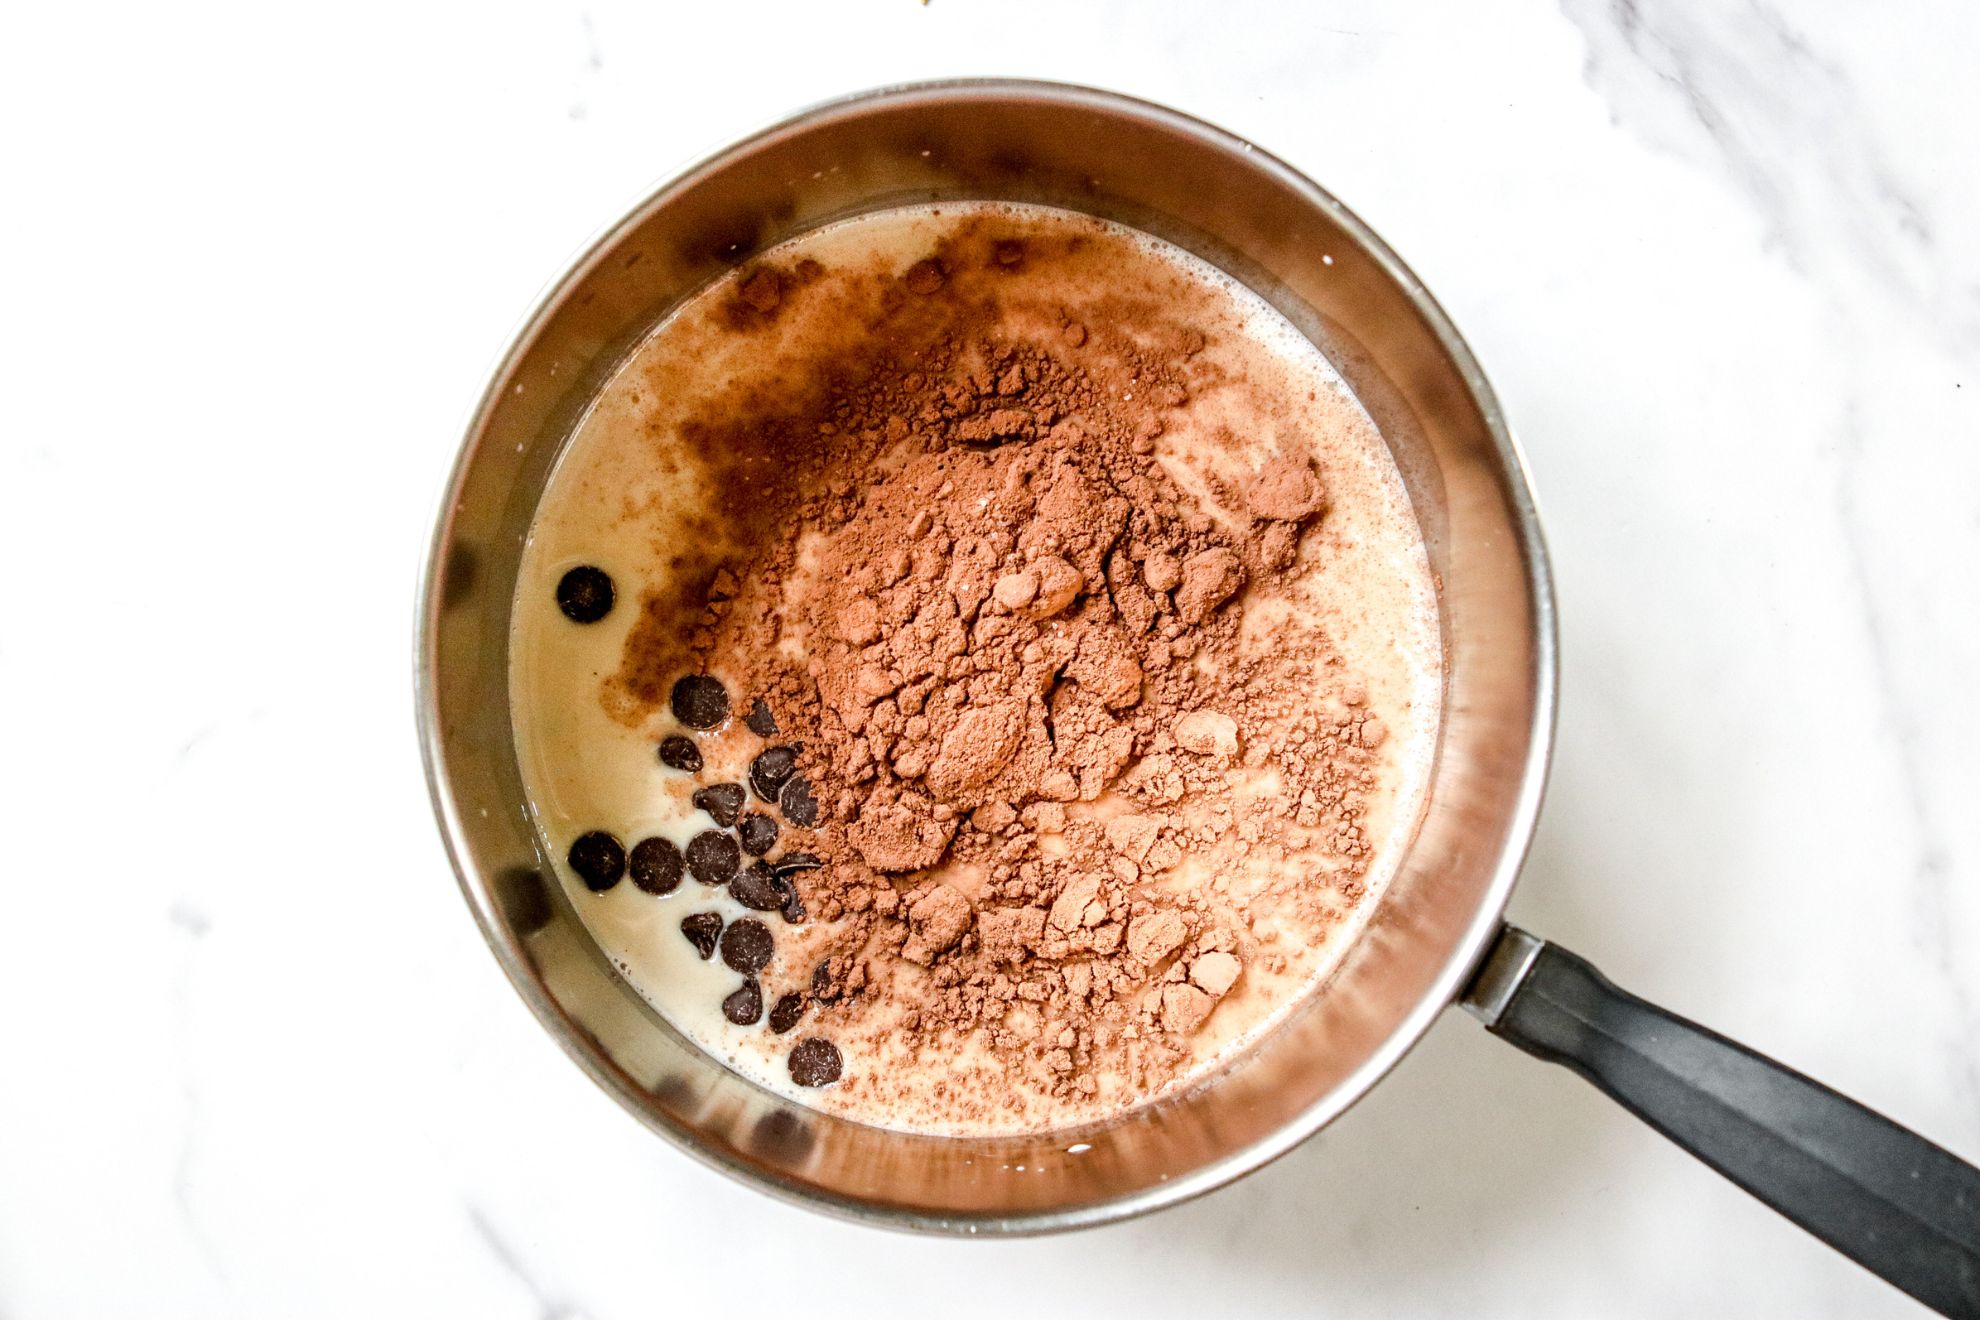 This is an overhead horizontal image of a saucepan sitting on a white marble surface. In the saucepan is oat milk, cocoa powder, and chocolate chips.